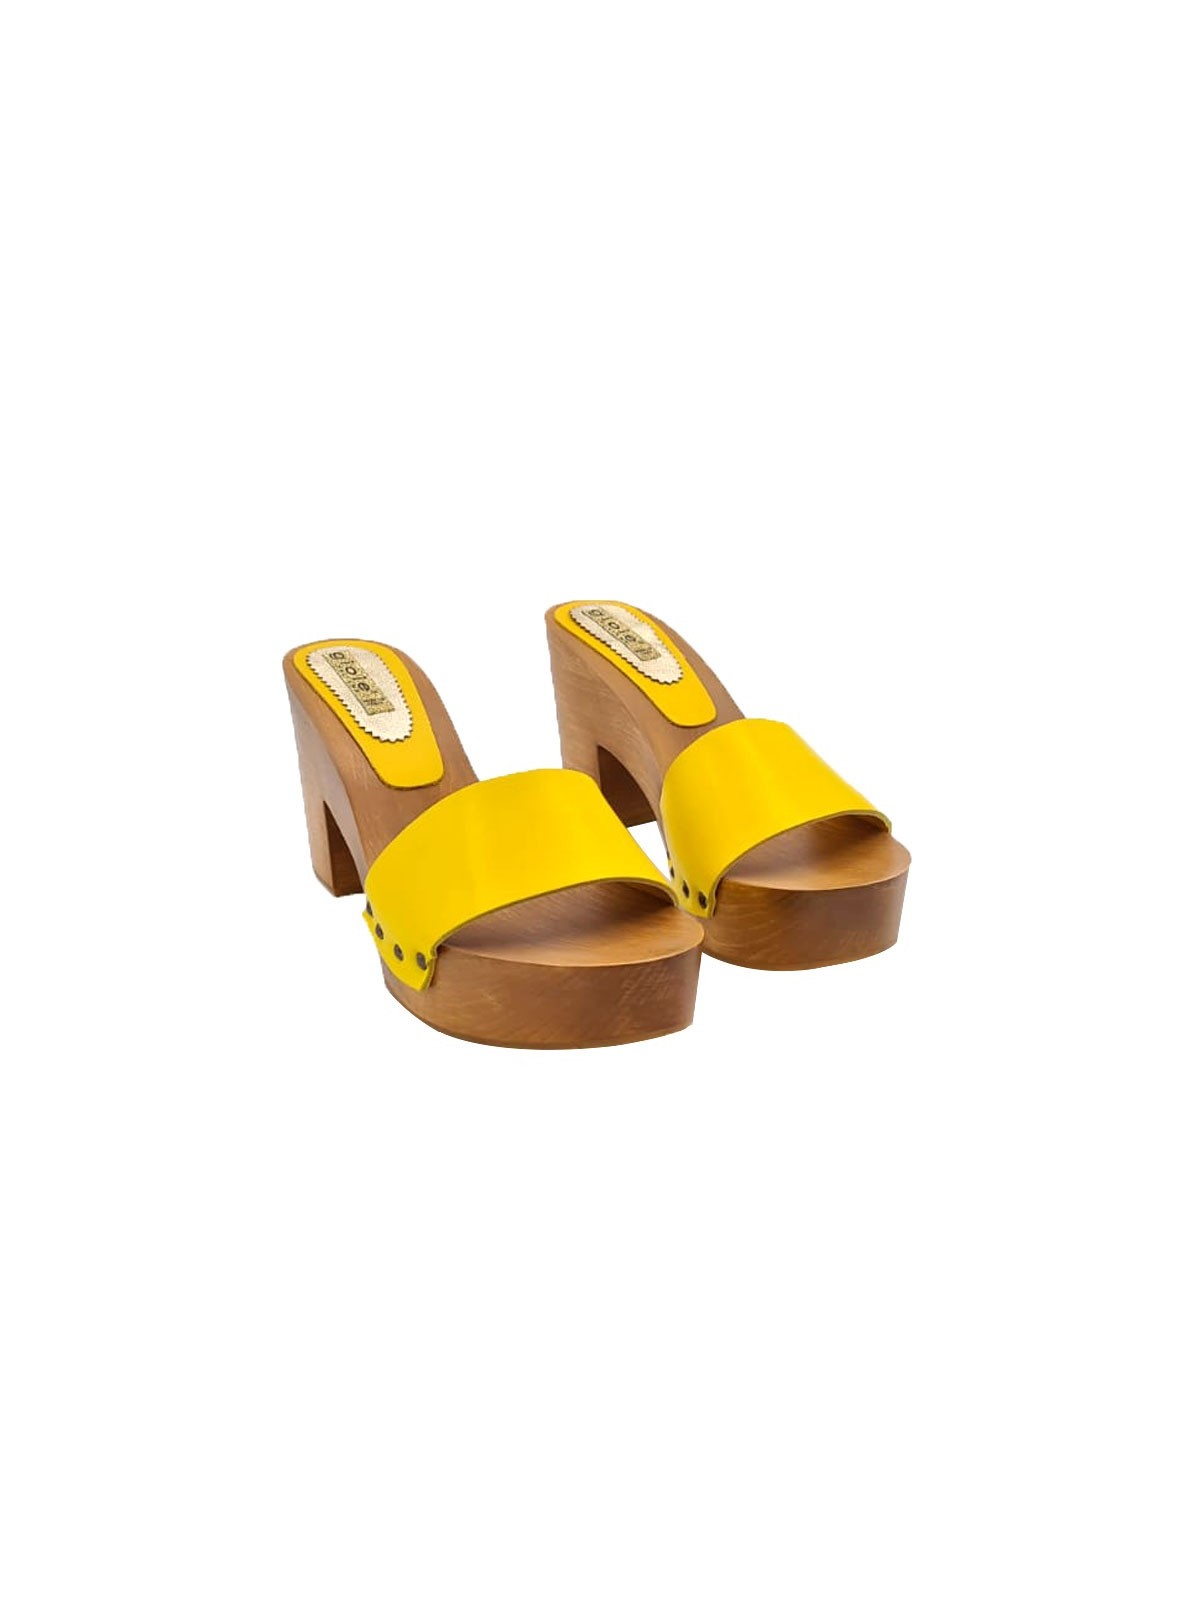 YELLOW LEATHER CLOGS WITH 9 CM HEEL